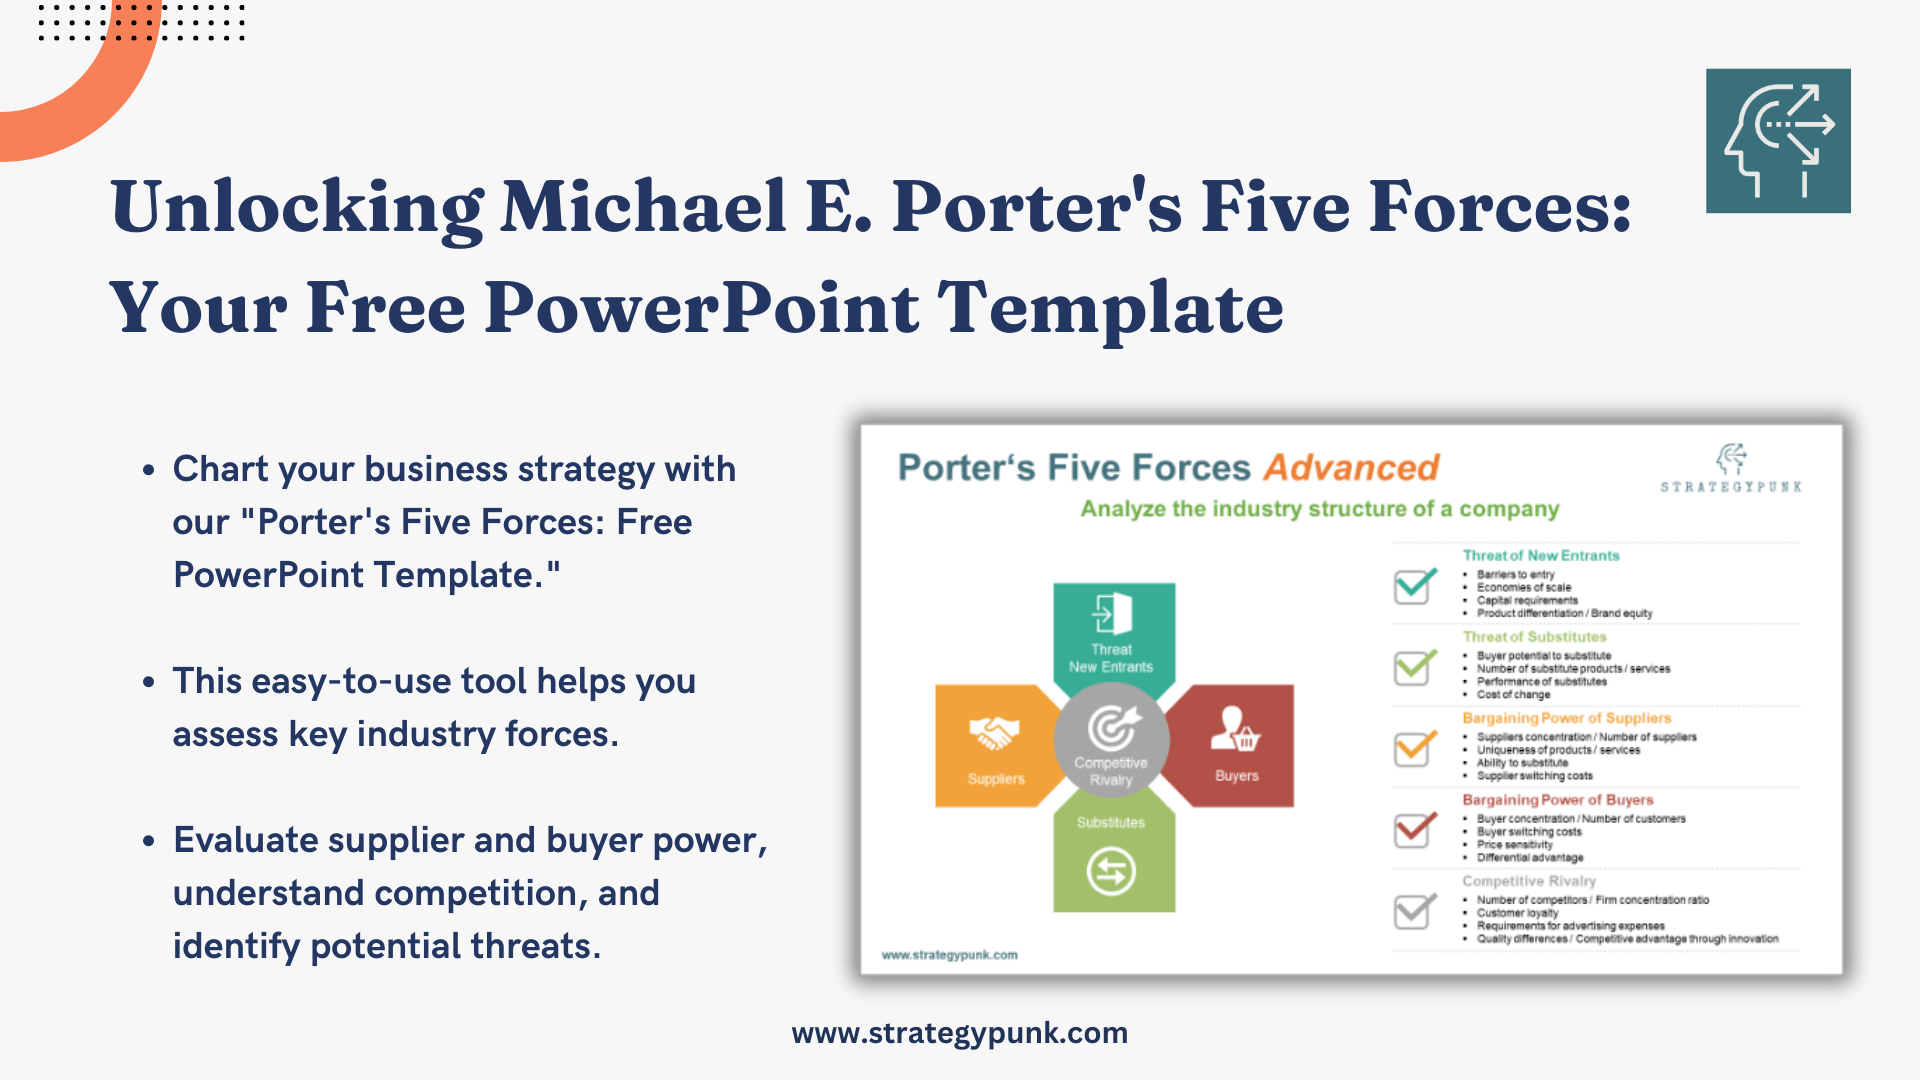 Unlocking Michael E. Porter's Five Forces: Your Free PowerPoint Template